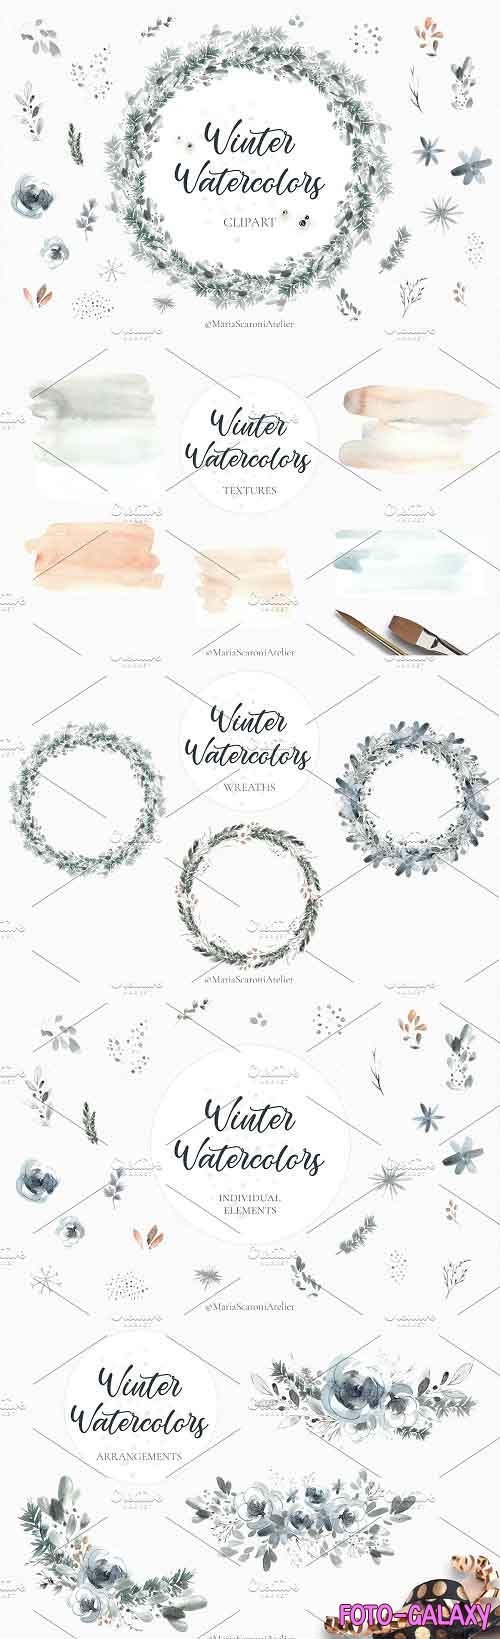 Watercolor Christmas Clipart - 5578154